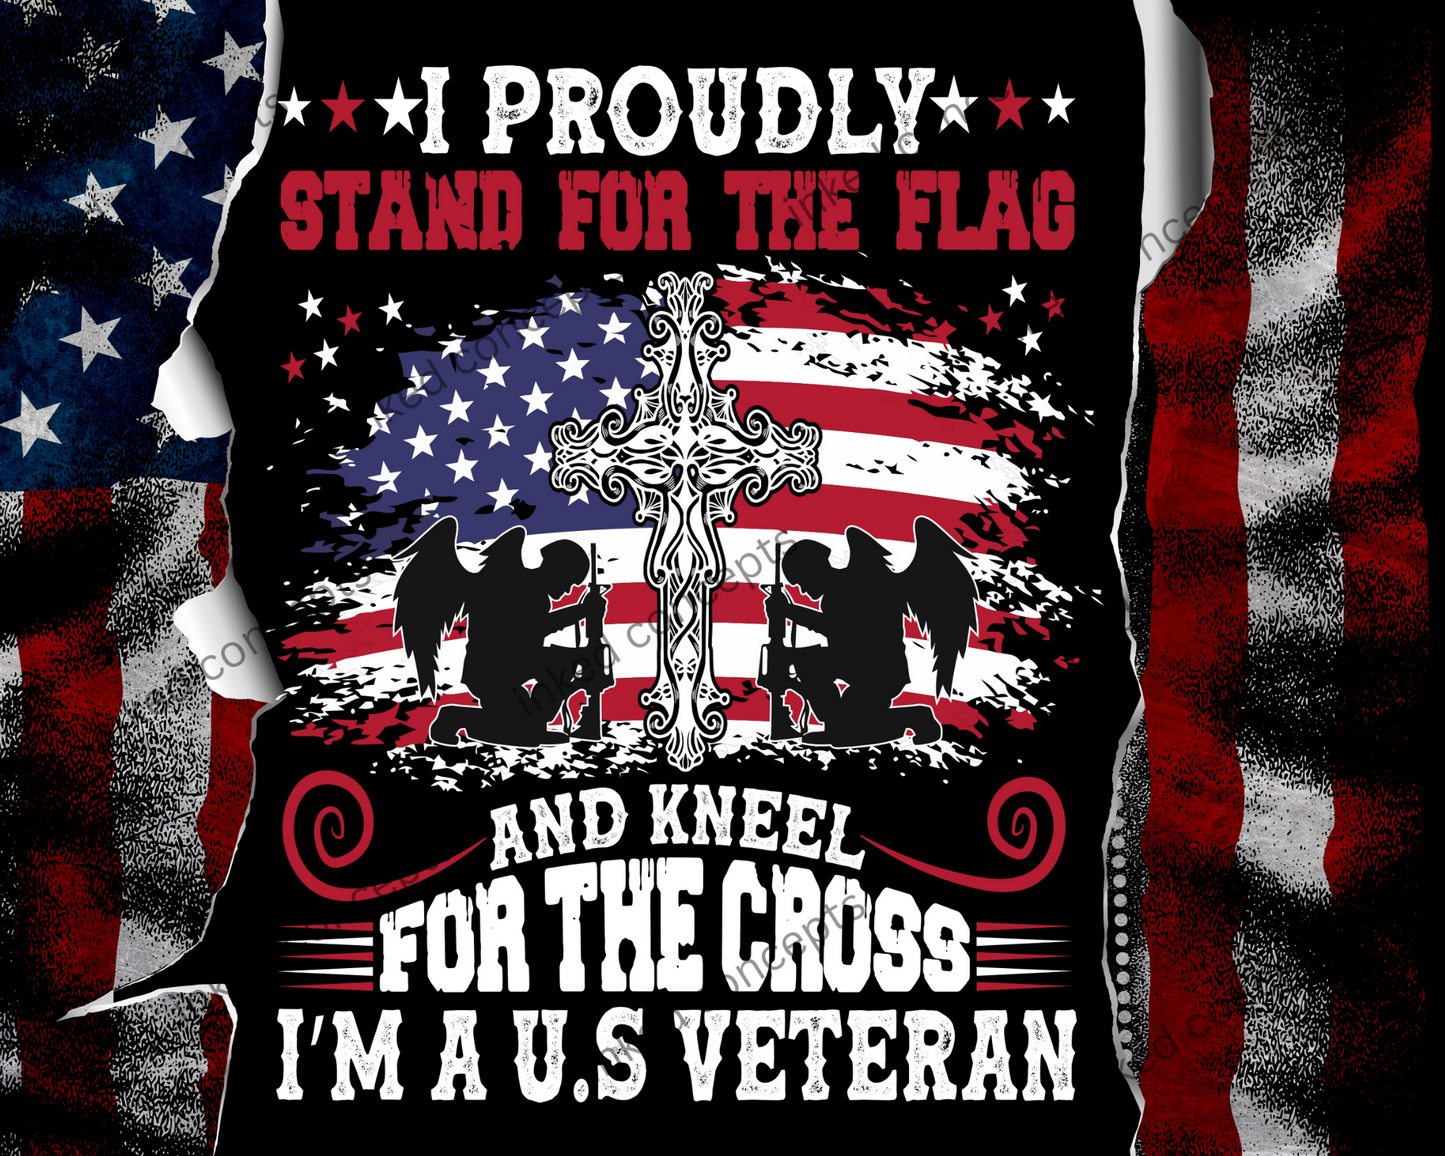 United States Veteran Stand For The Flag, Kneel For The Cross